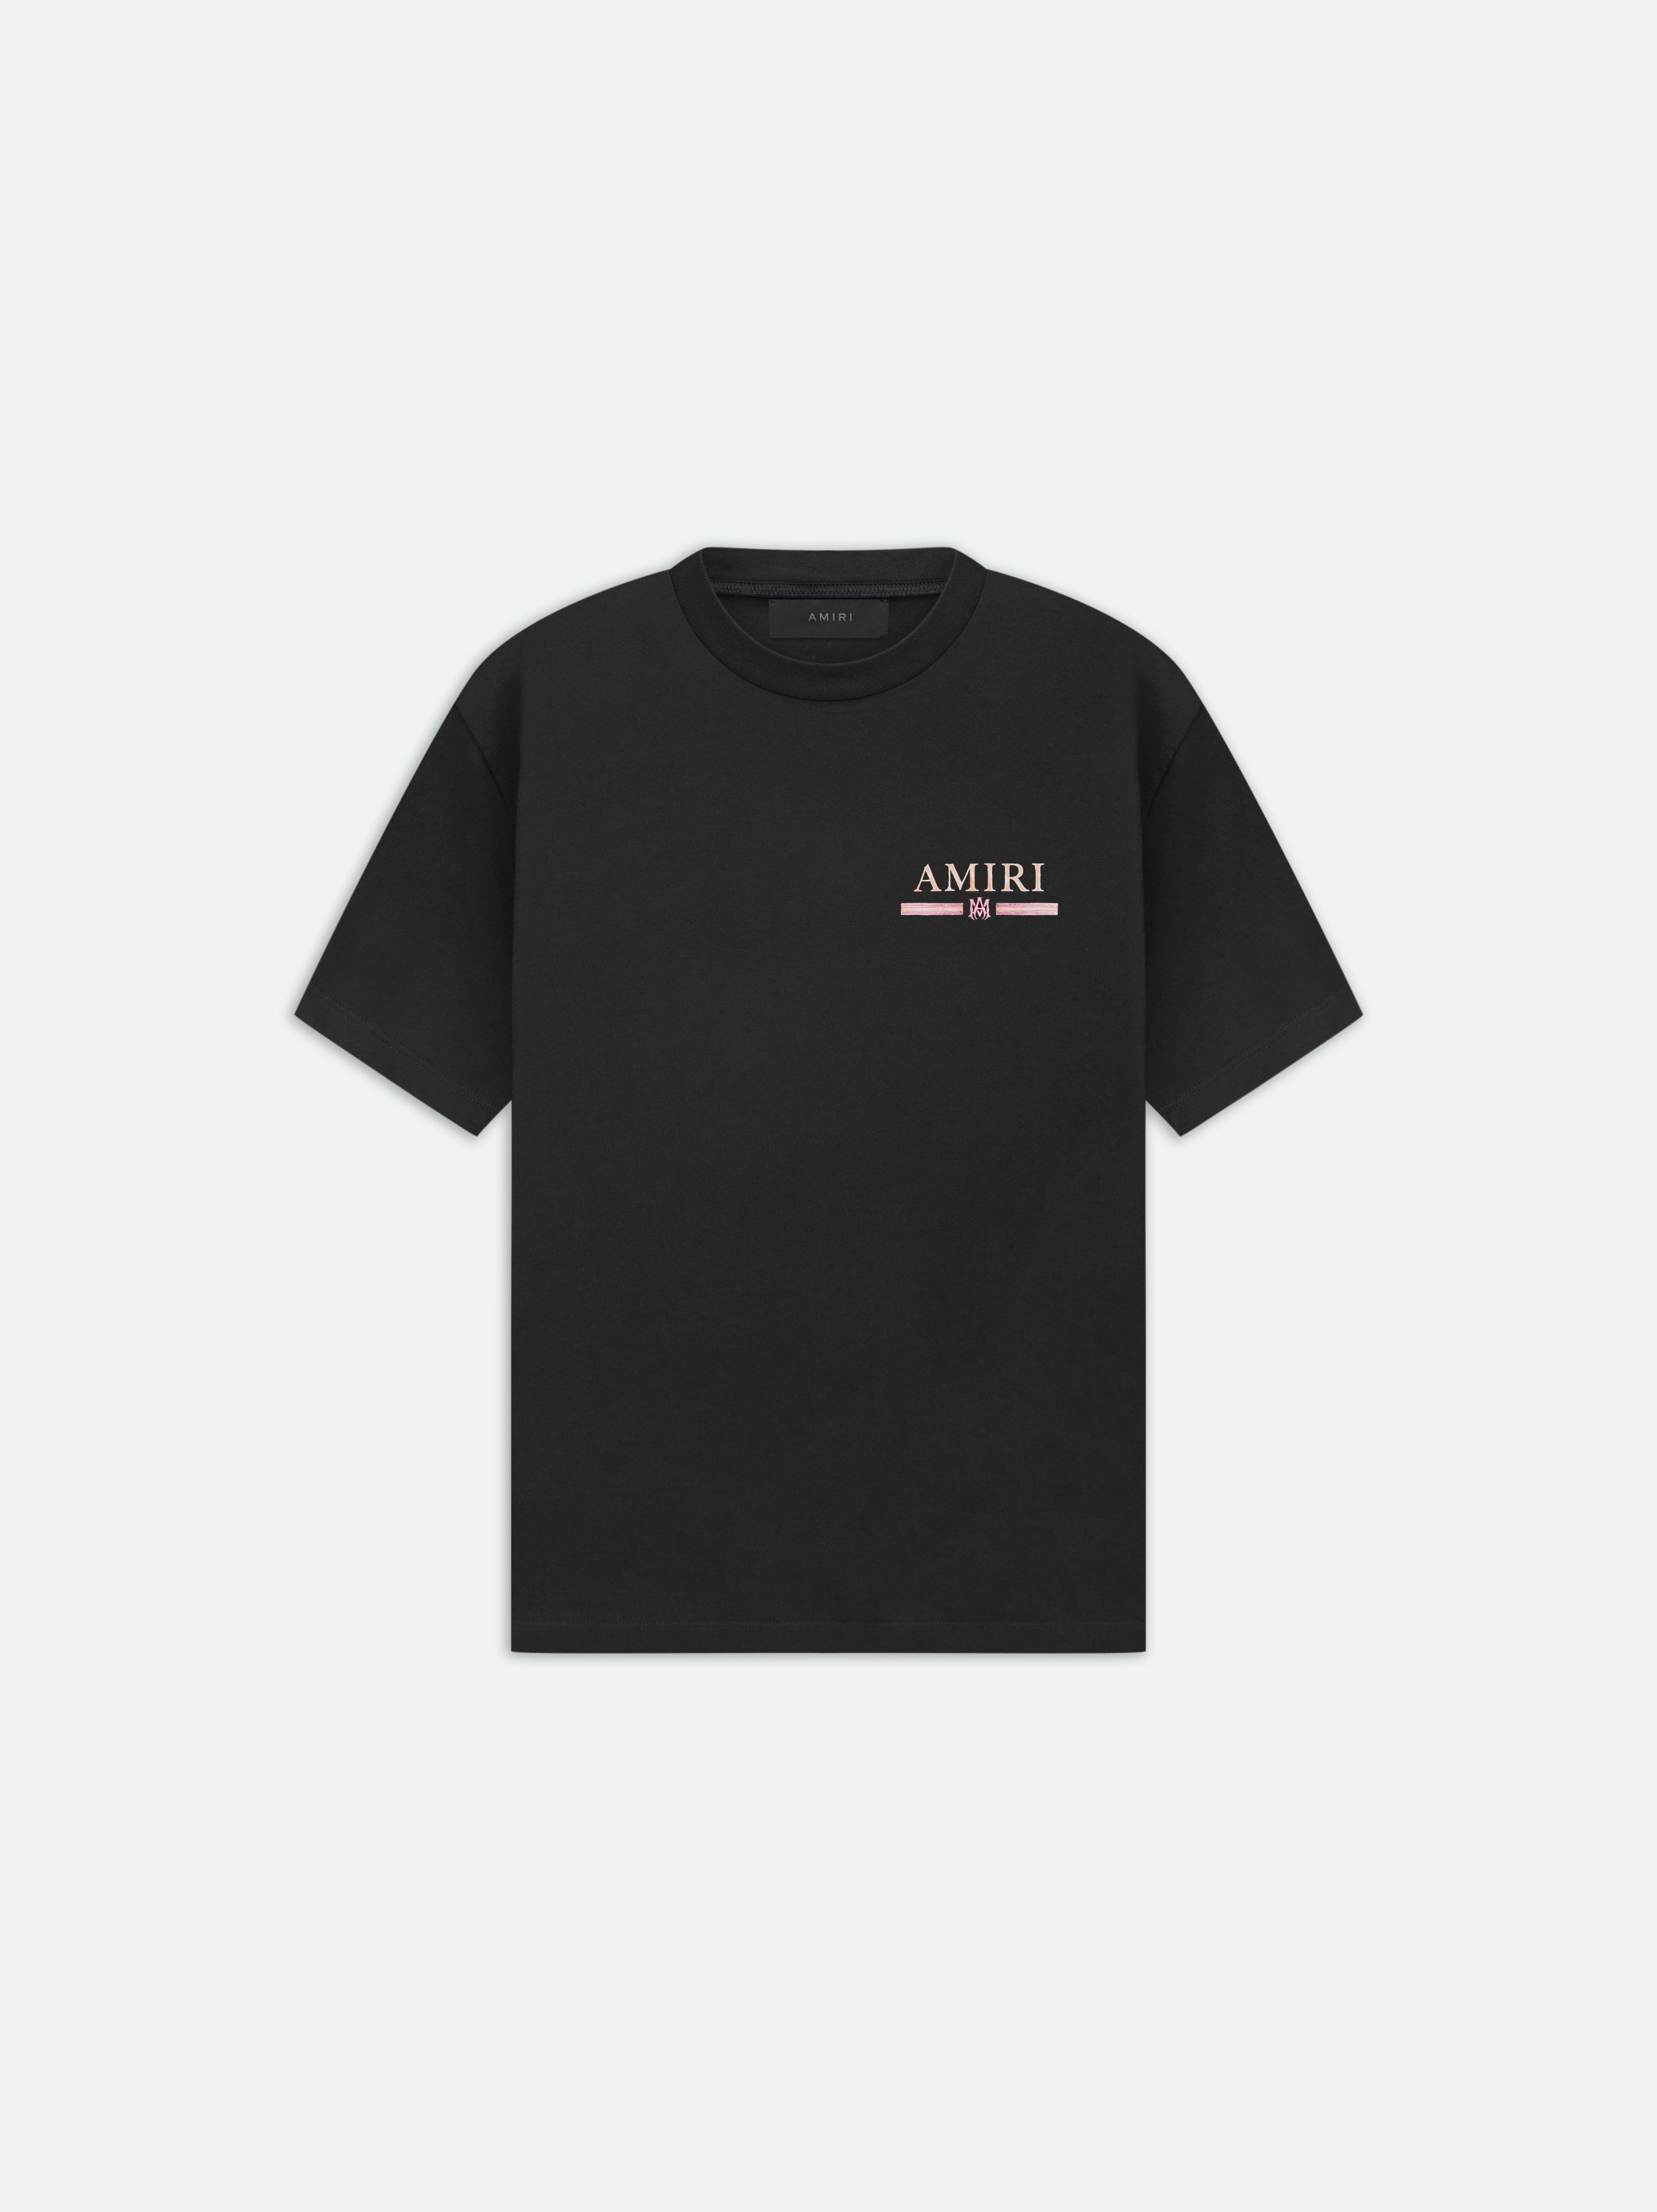 Product MA WATERCOLOR BAR TEE - Black featured image